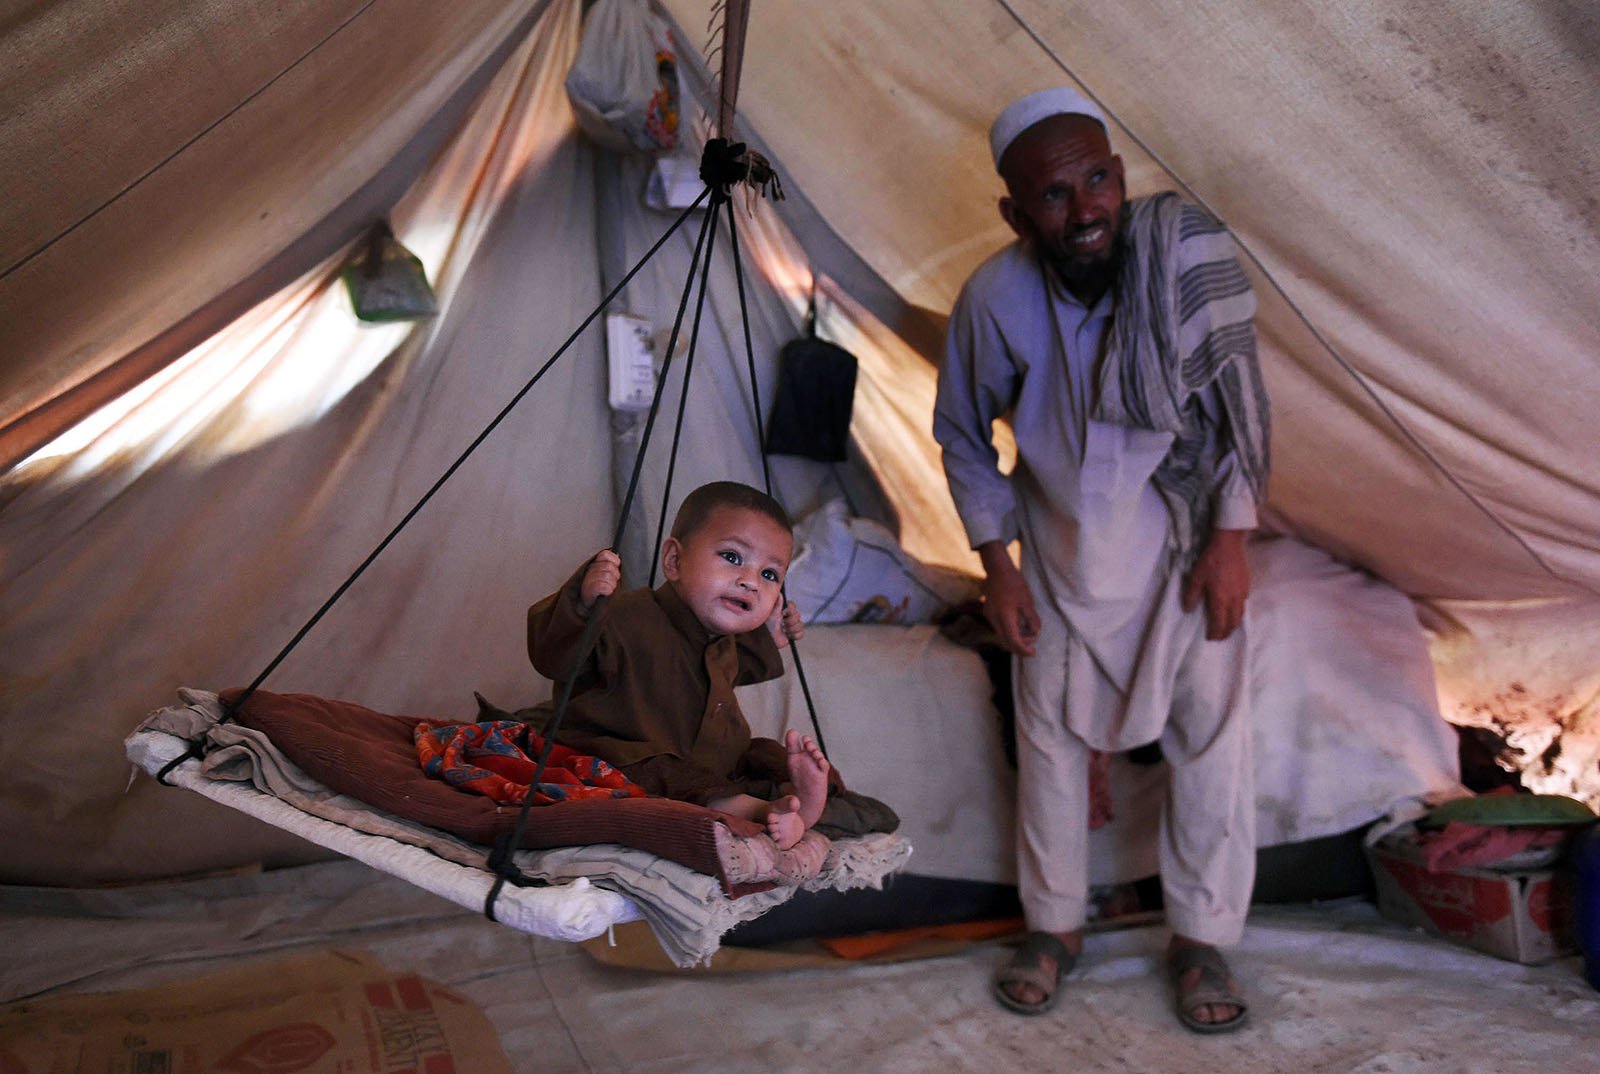 Almost home: Pakistani refugees in Afghanistan return